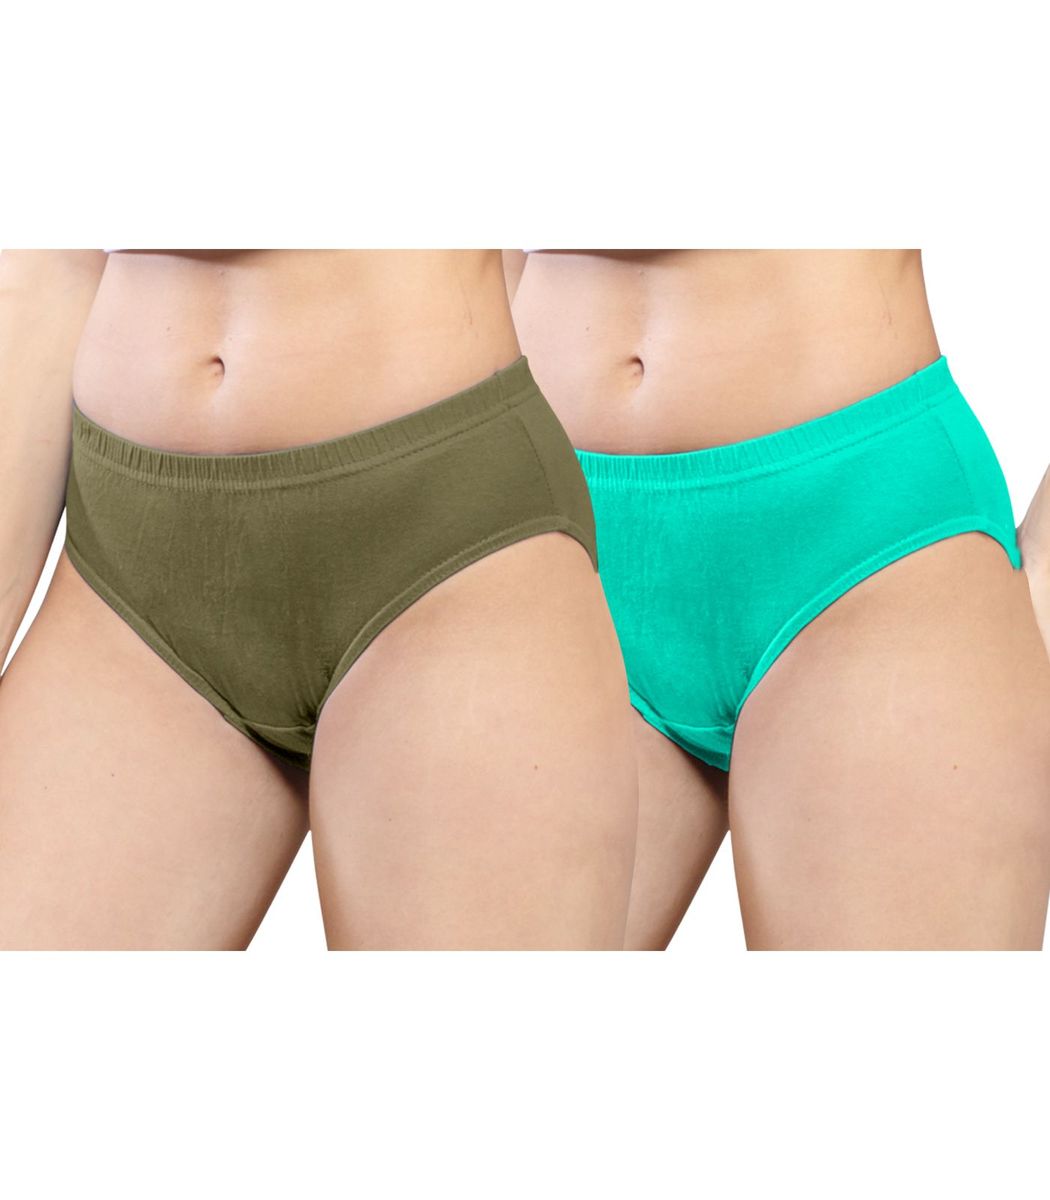 NRG Womens Cotton Assorted Colour Panties ( Pack of 2 Light Green - Mint  Green ) L01 Hipster